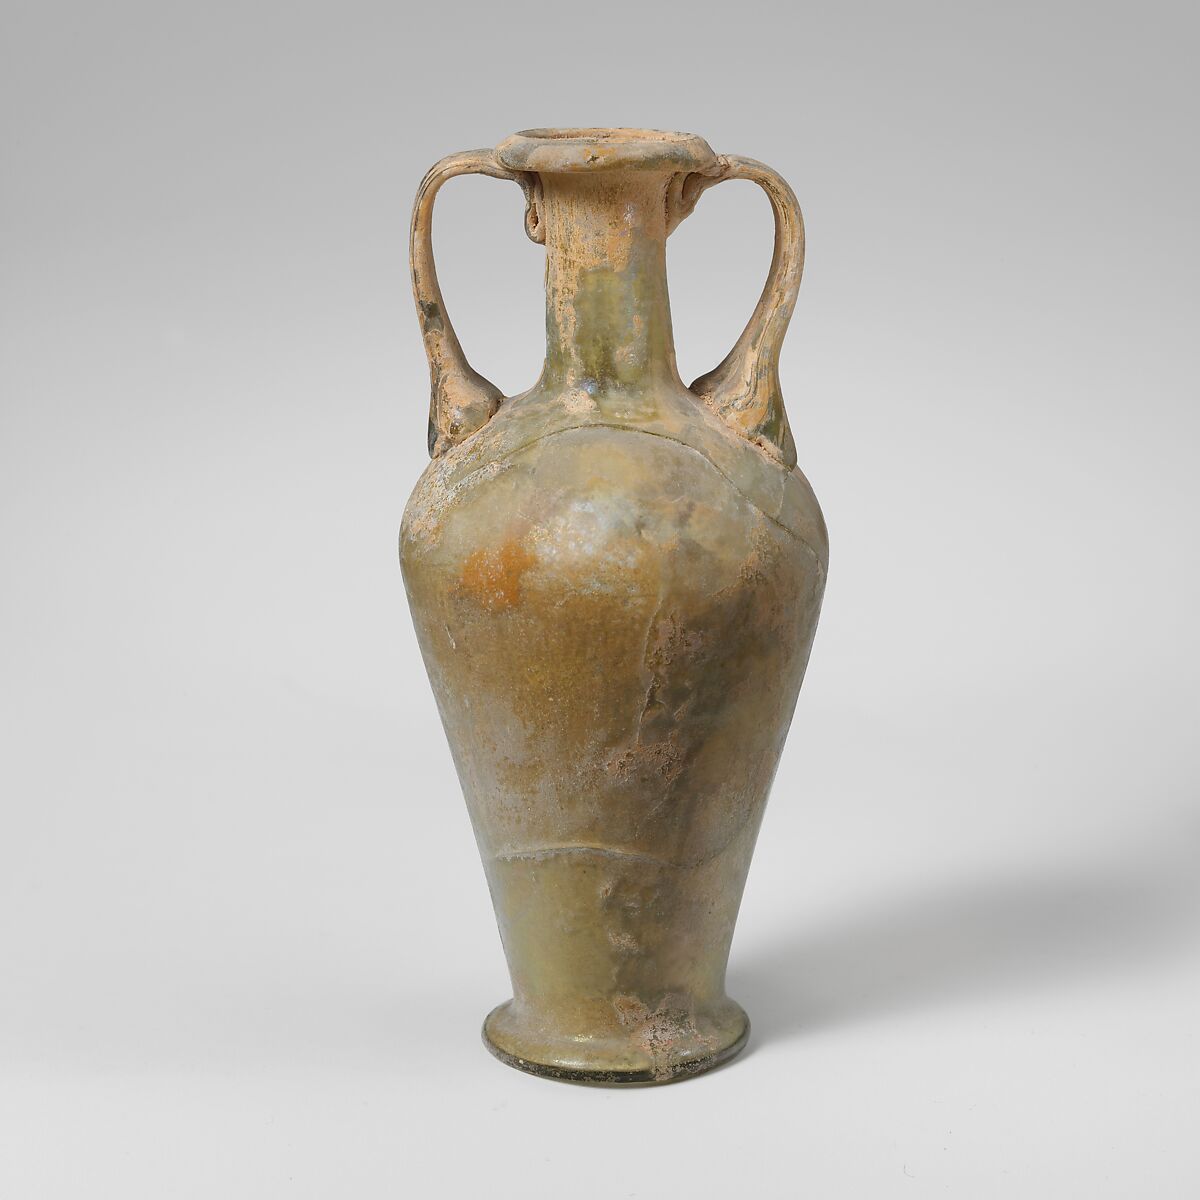 Glass flask with two handles, Glass, Roman, Cypriot 